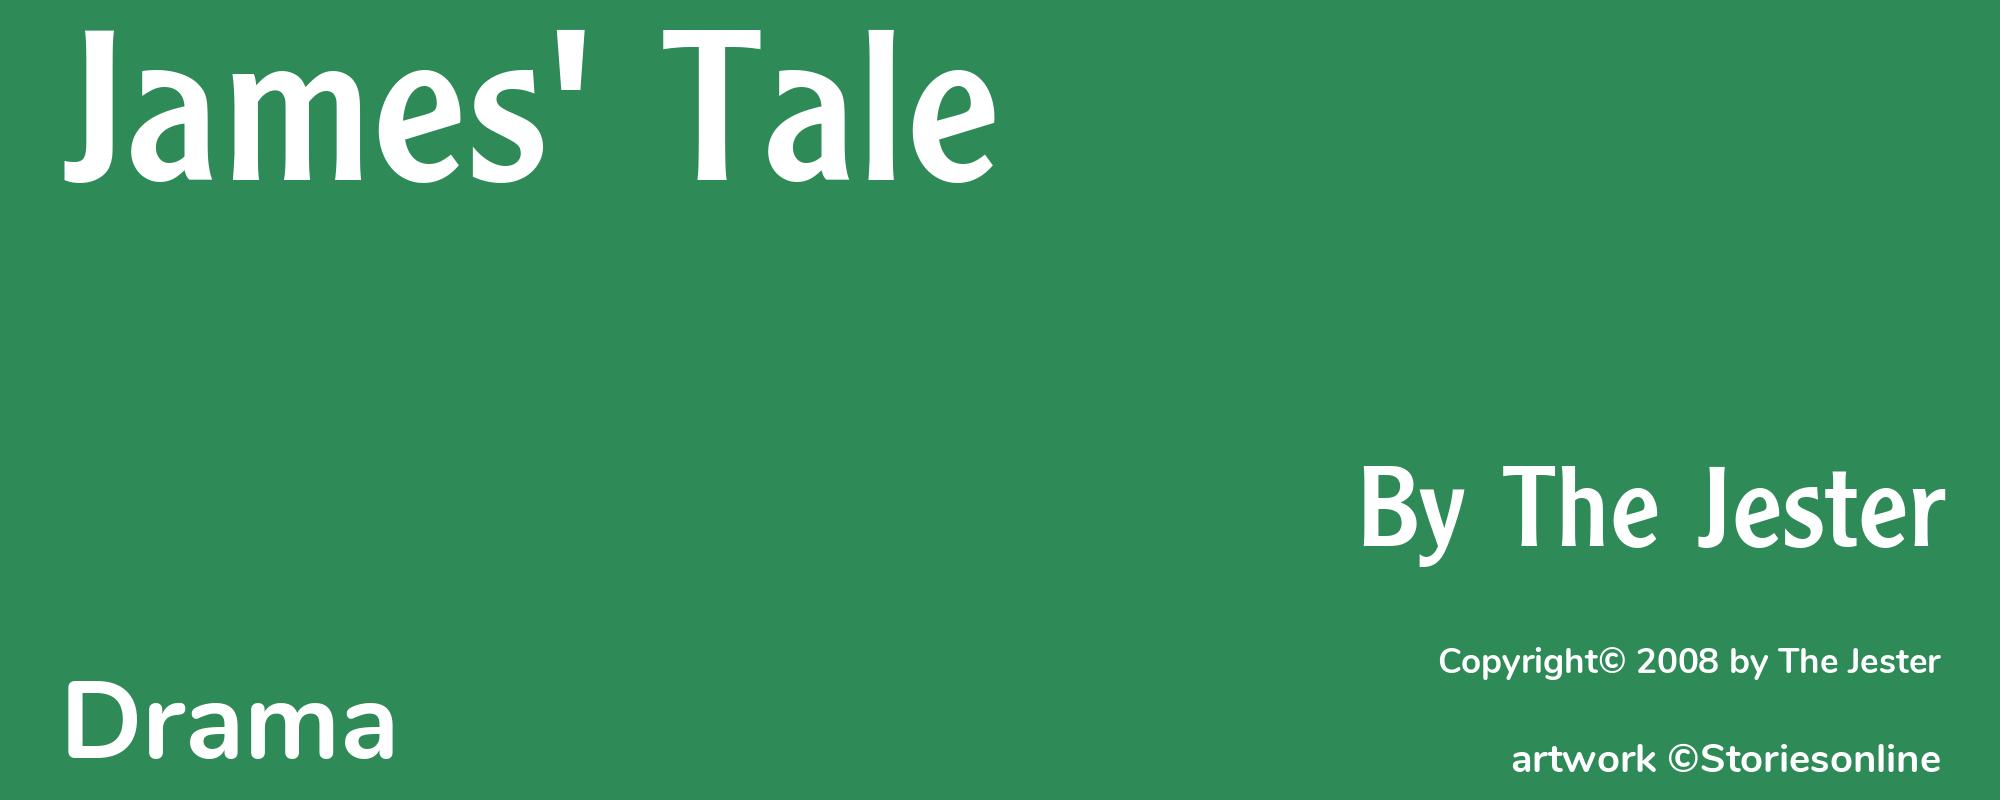 James' Tale - Cover